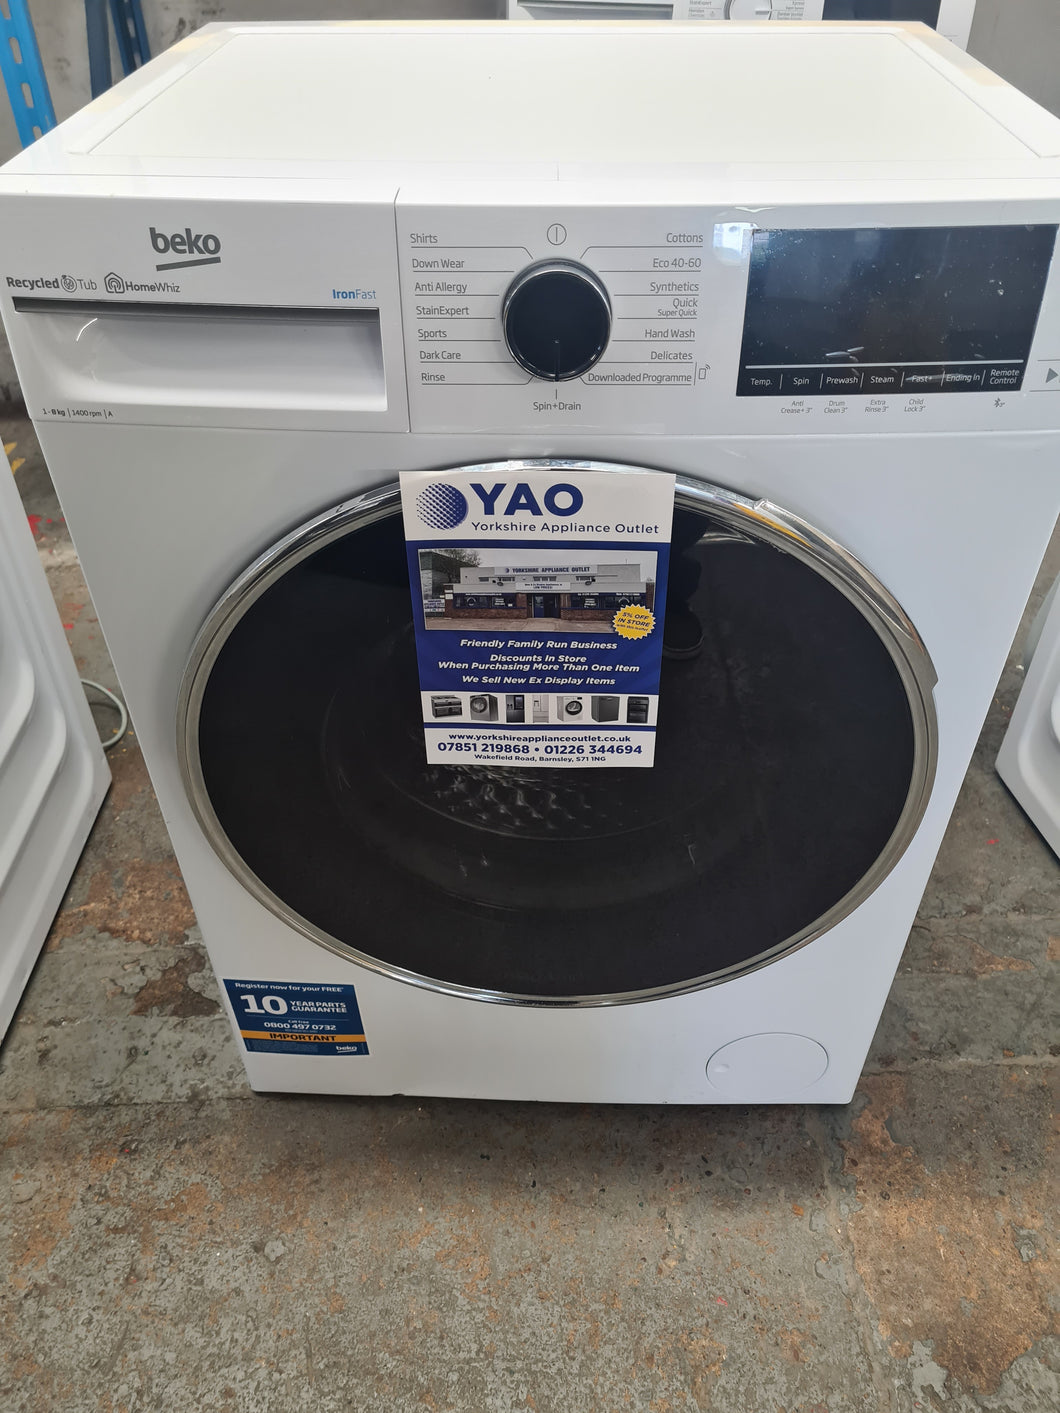 Beko Aquatech RecycledTub B5W5841AW 8kg Washing Machine with 1400 rpm - White - A Rated